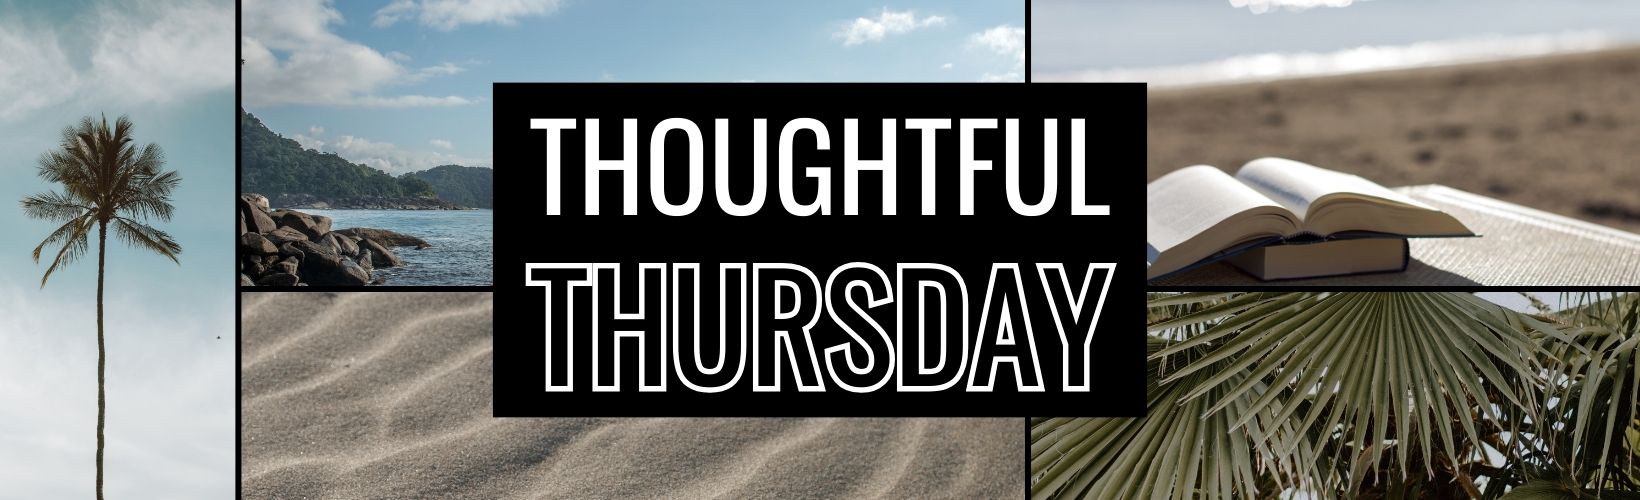 Thoughtful Thursday: How to Support Someone Going Through a Hard Time